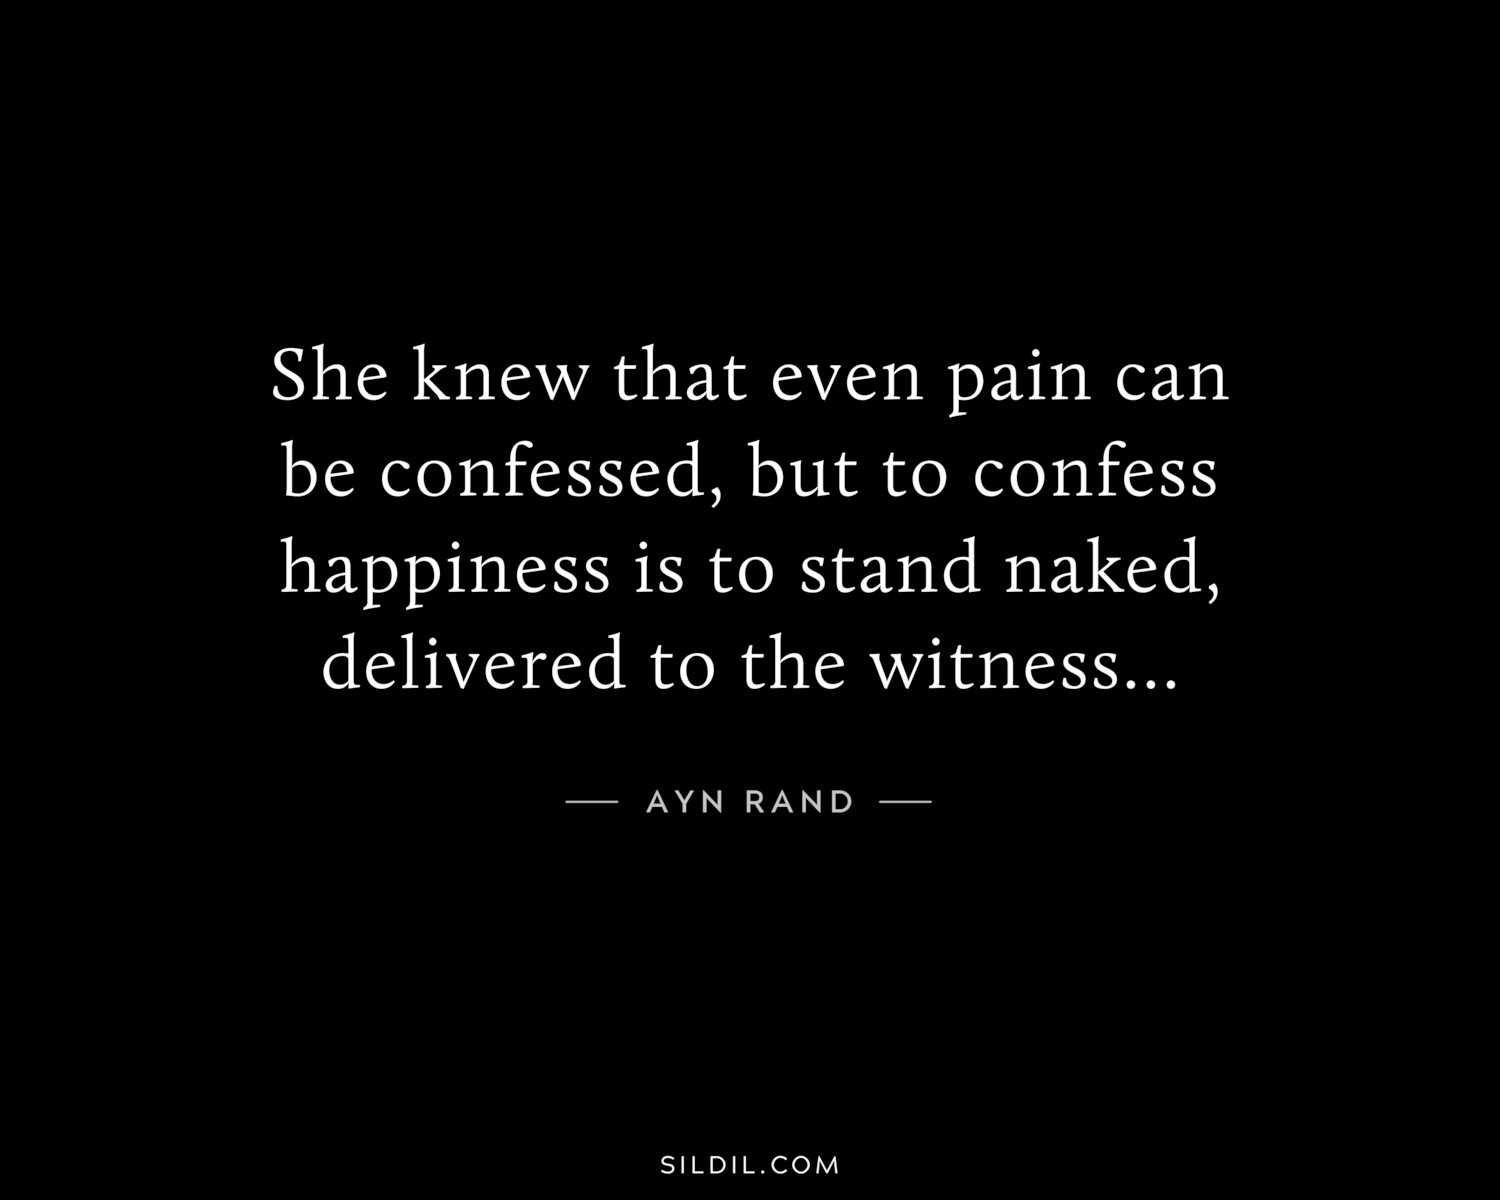 She knew that even pain can be confessed, but to confess happiness is to stand naked, delivered to the witness…